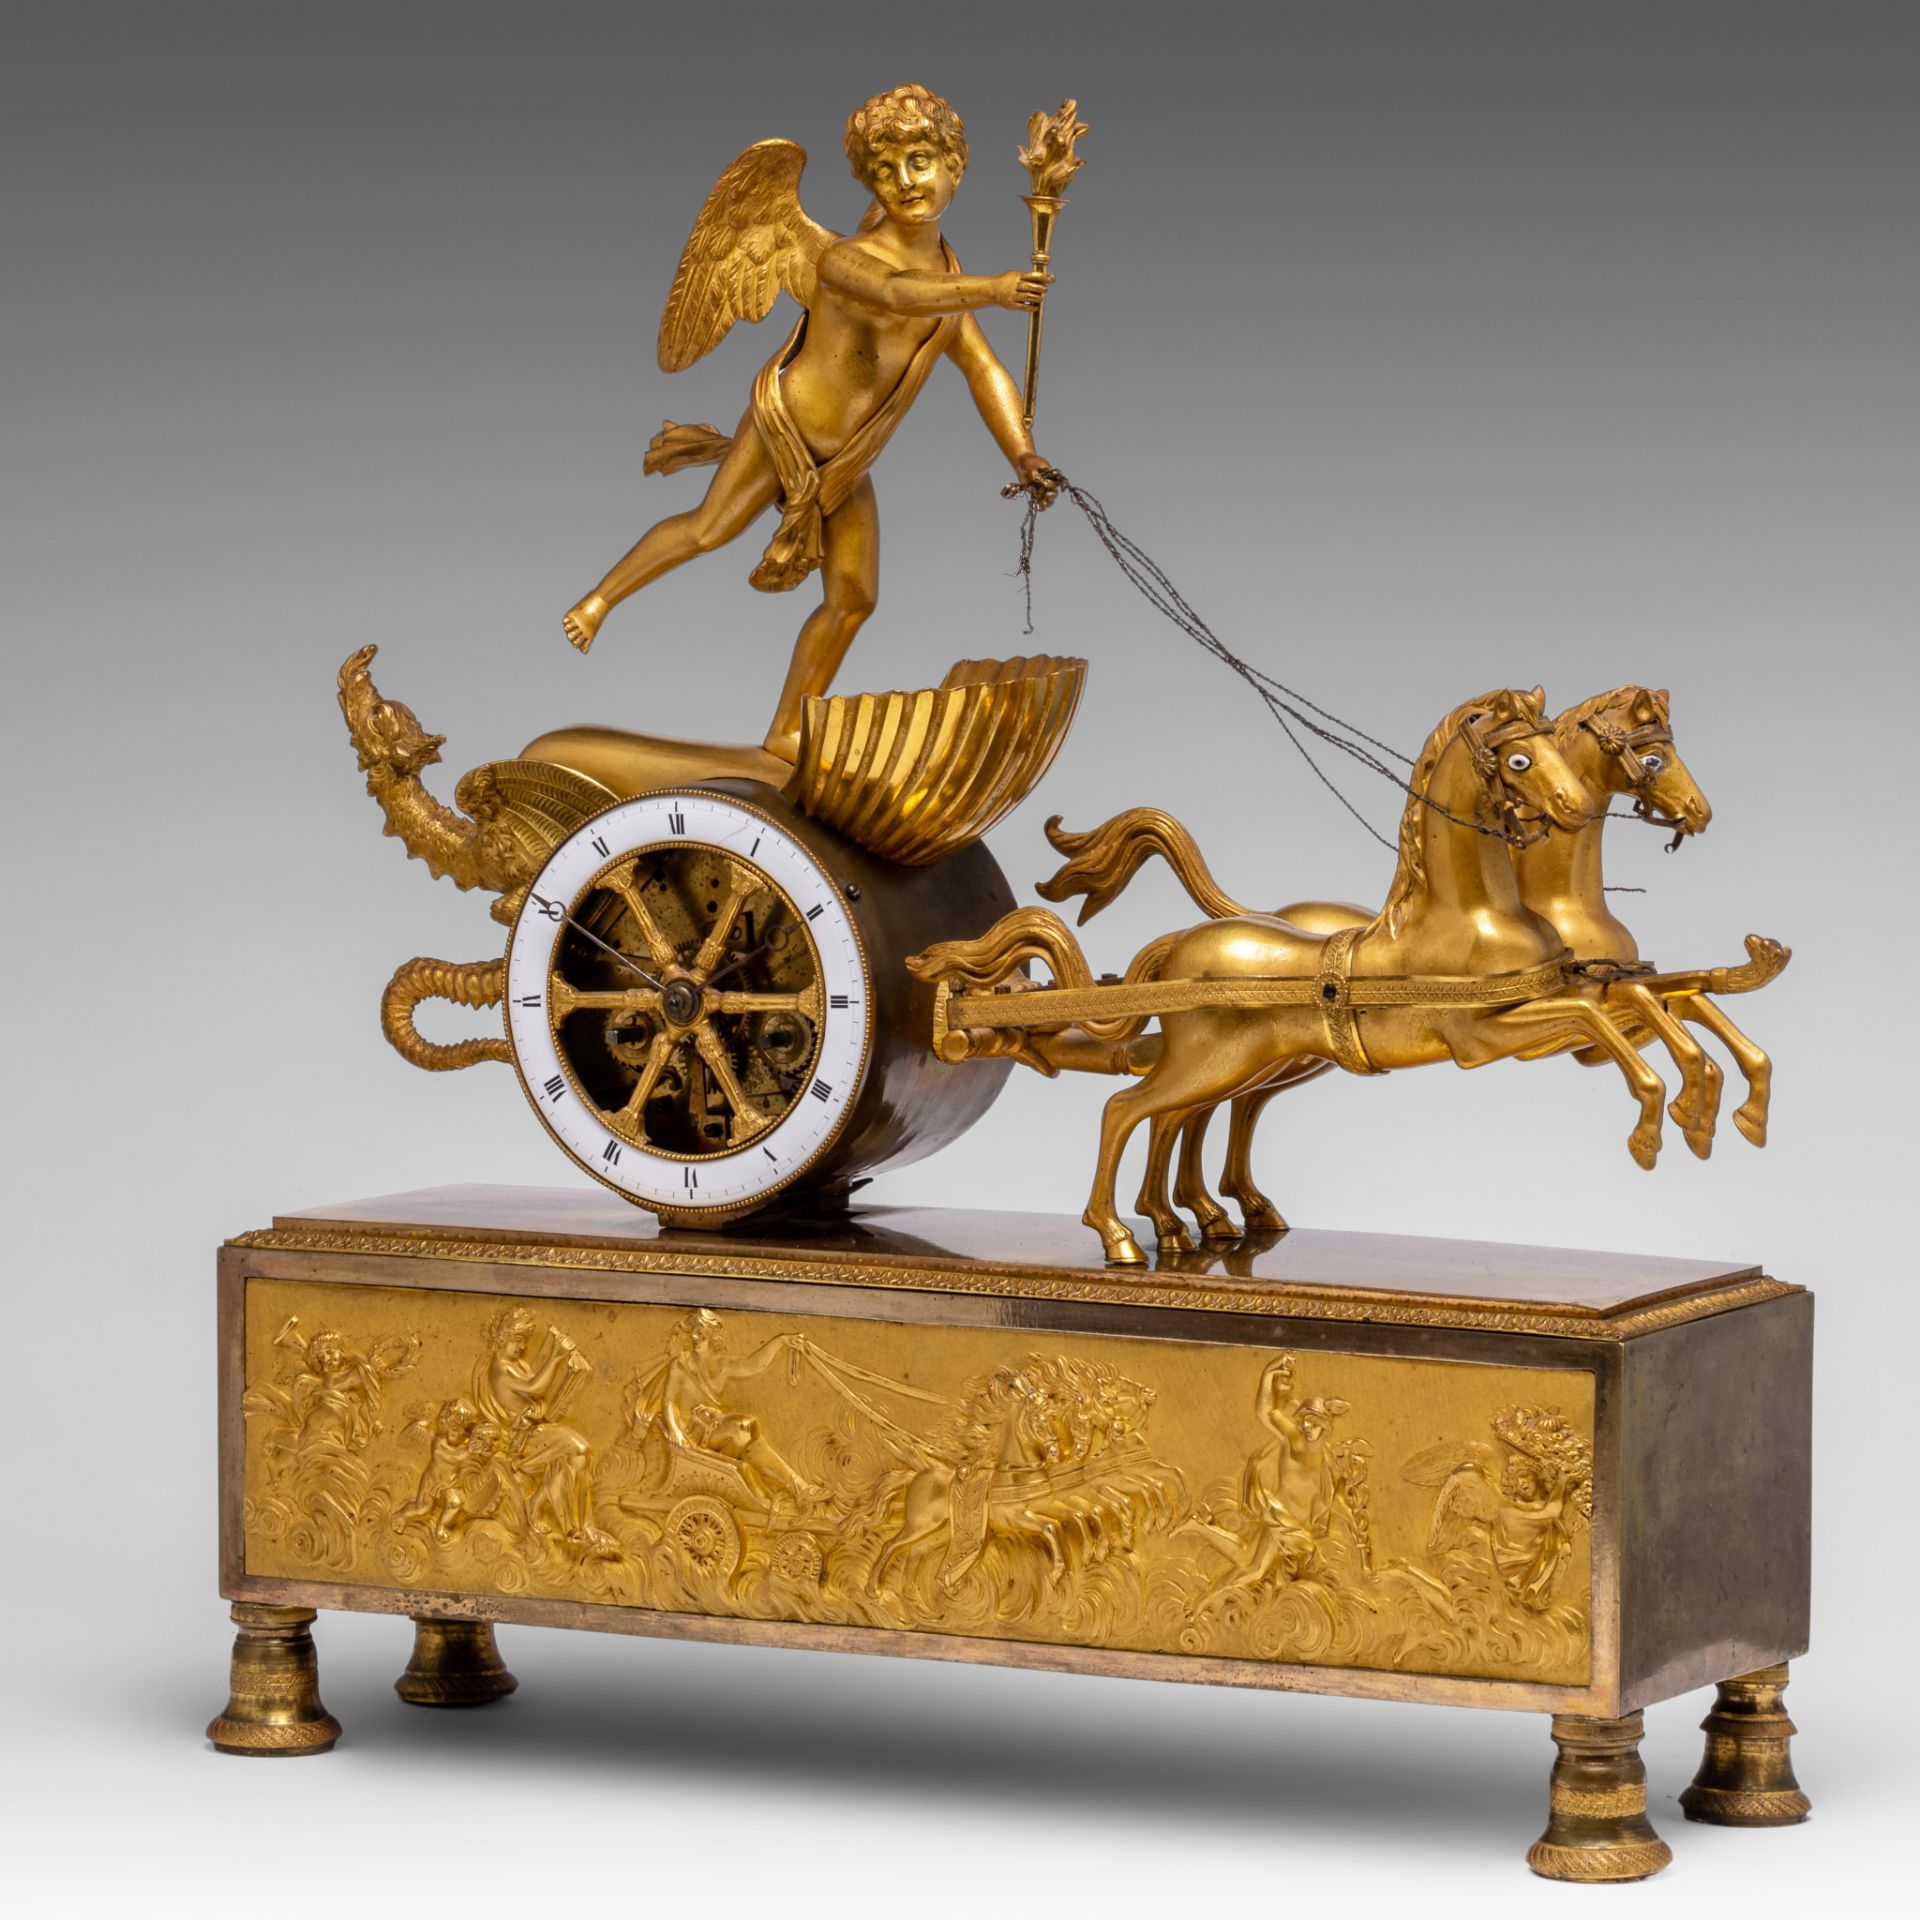 A fine Empire gilt bronze mantle clock of Cupid's chariot, ca. 1810, H 49 - W 46,5 cm - Image 2 of 6